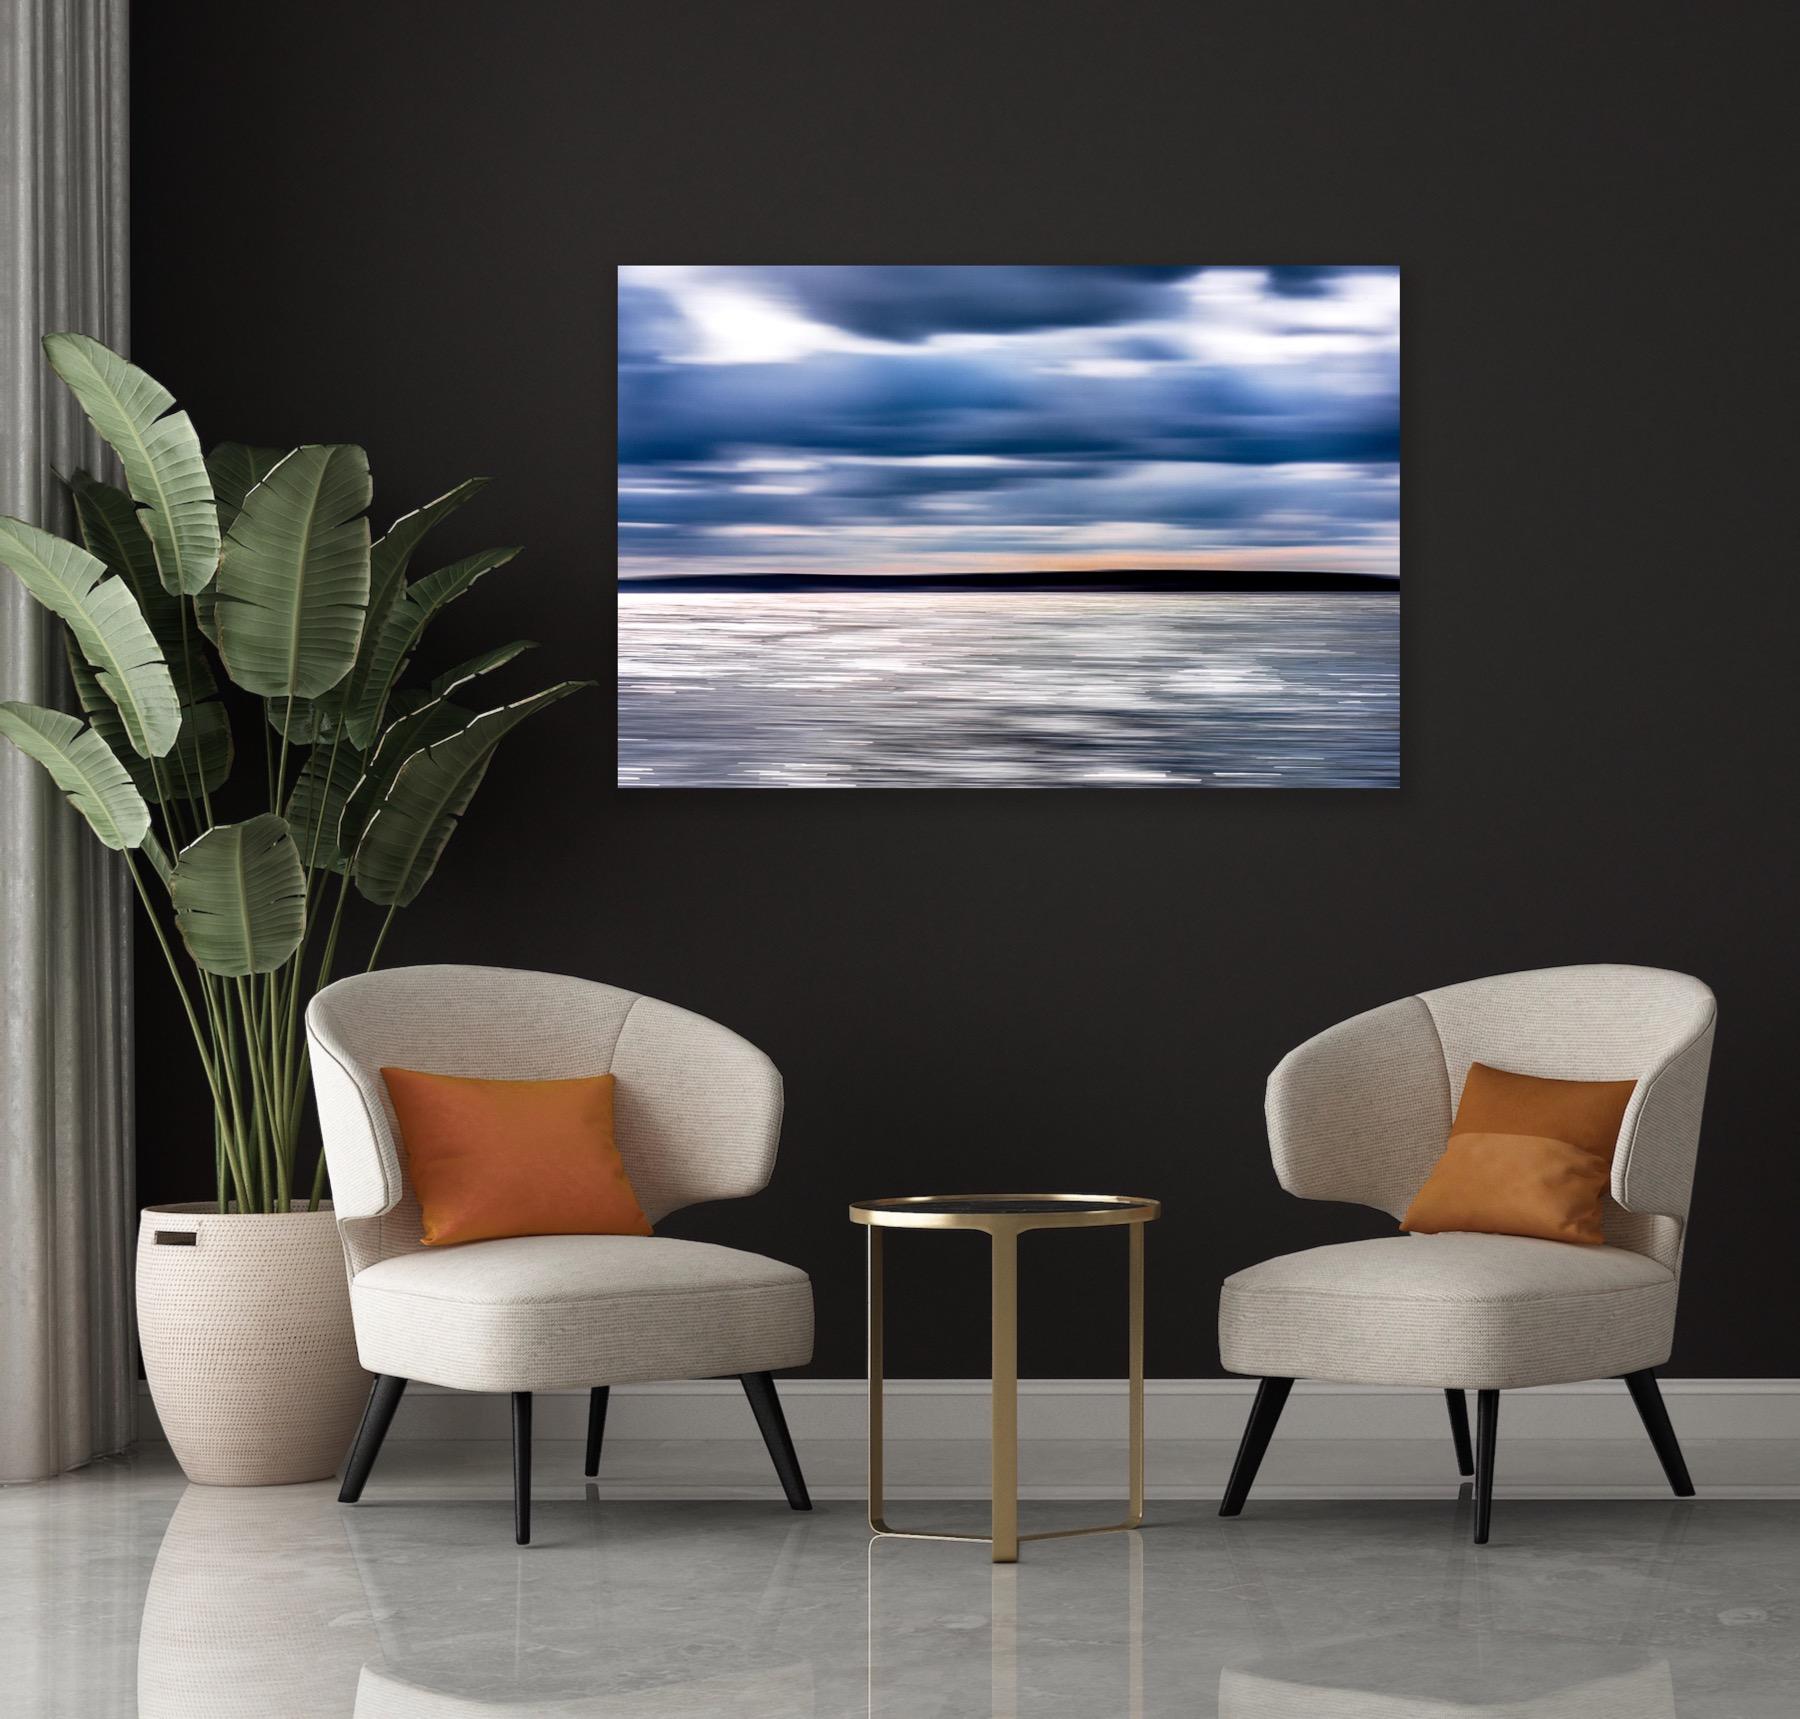 Darkening clouds gather over the bay as Autumn approaches. Shot outside of Sag Harbor, N.Y. 

Printed on archival fine art paper, mounted on dibond aluminum with a float mount backing. Available in a wide variety of custom sizes, print mediums and